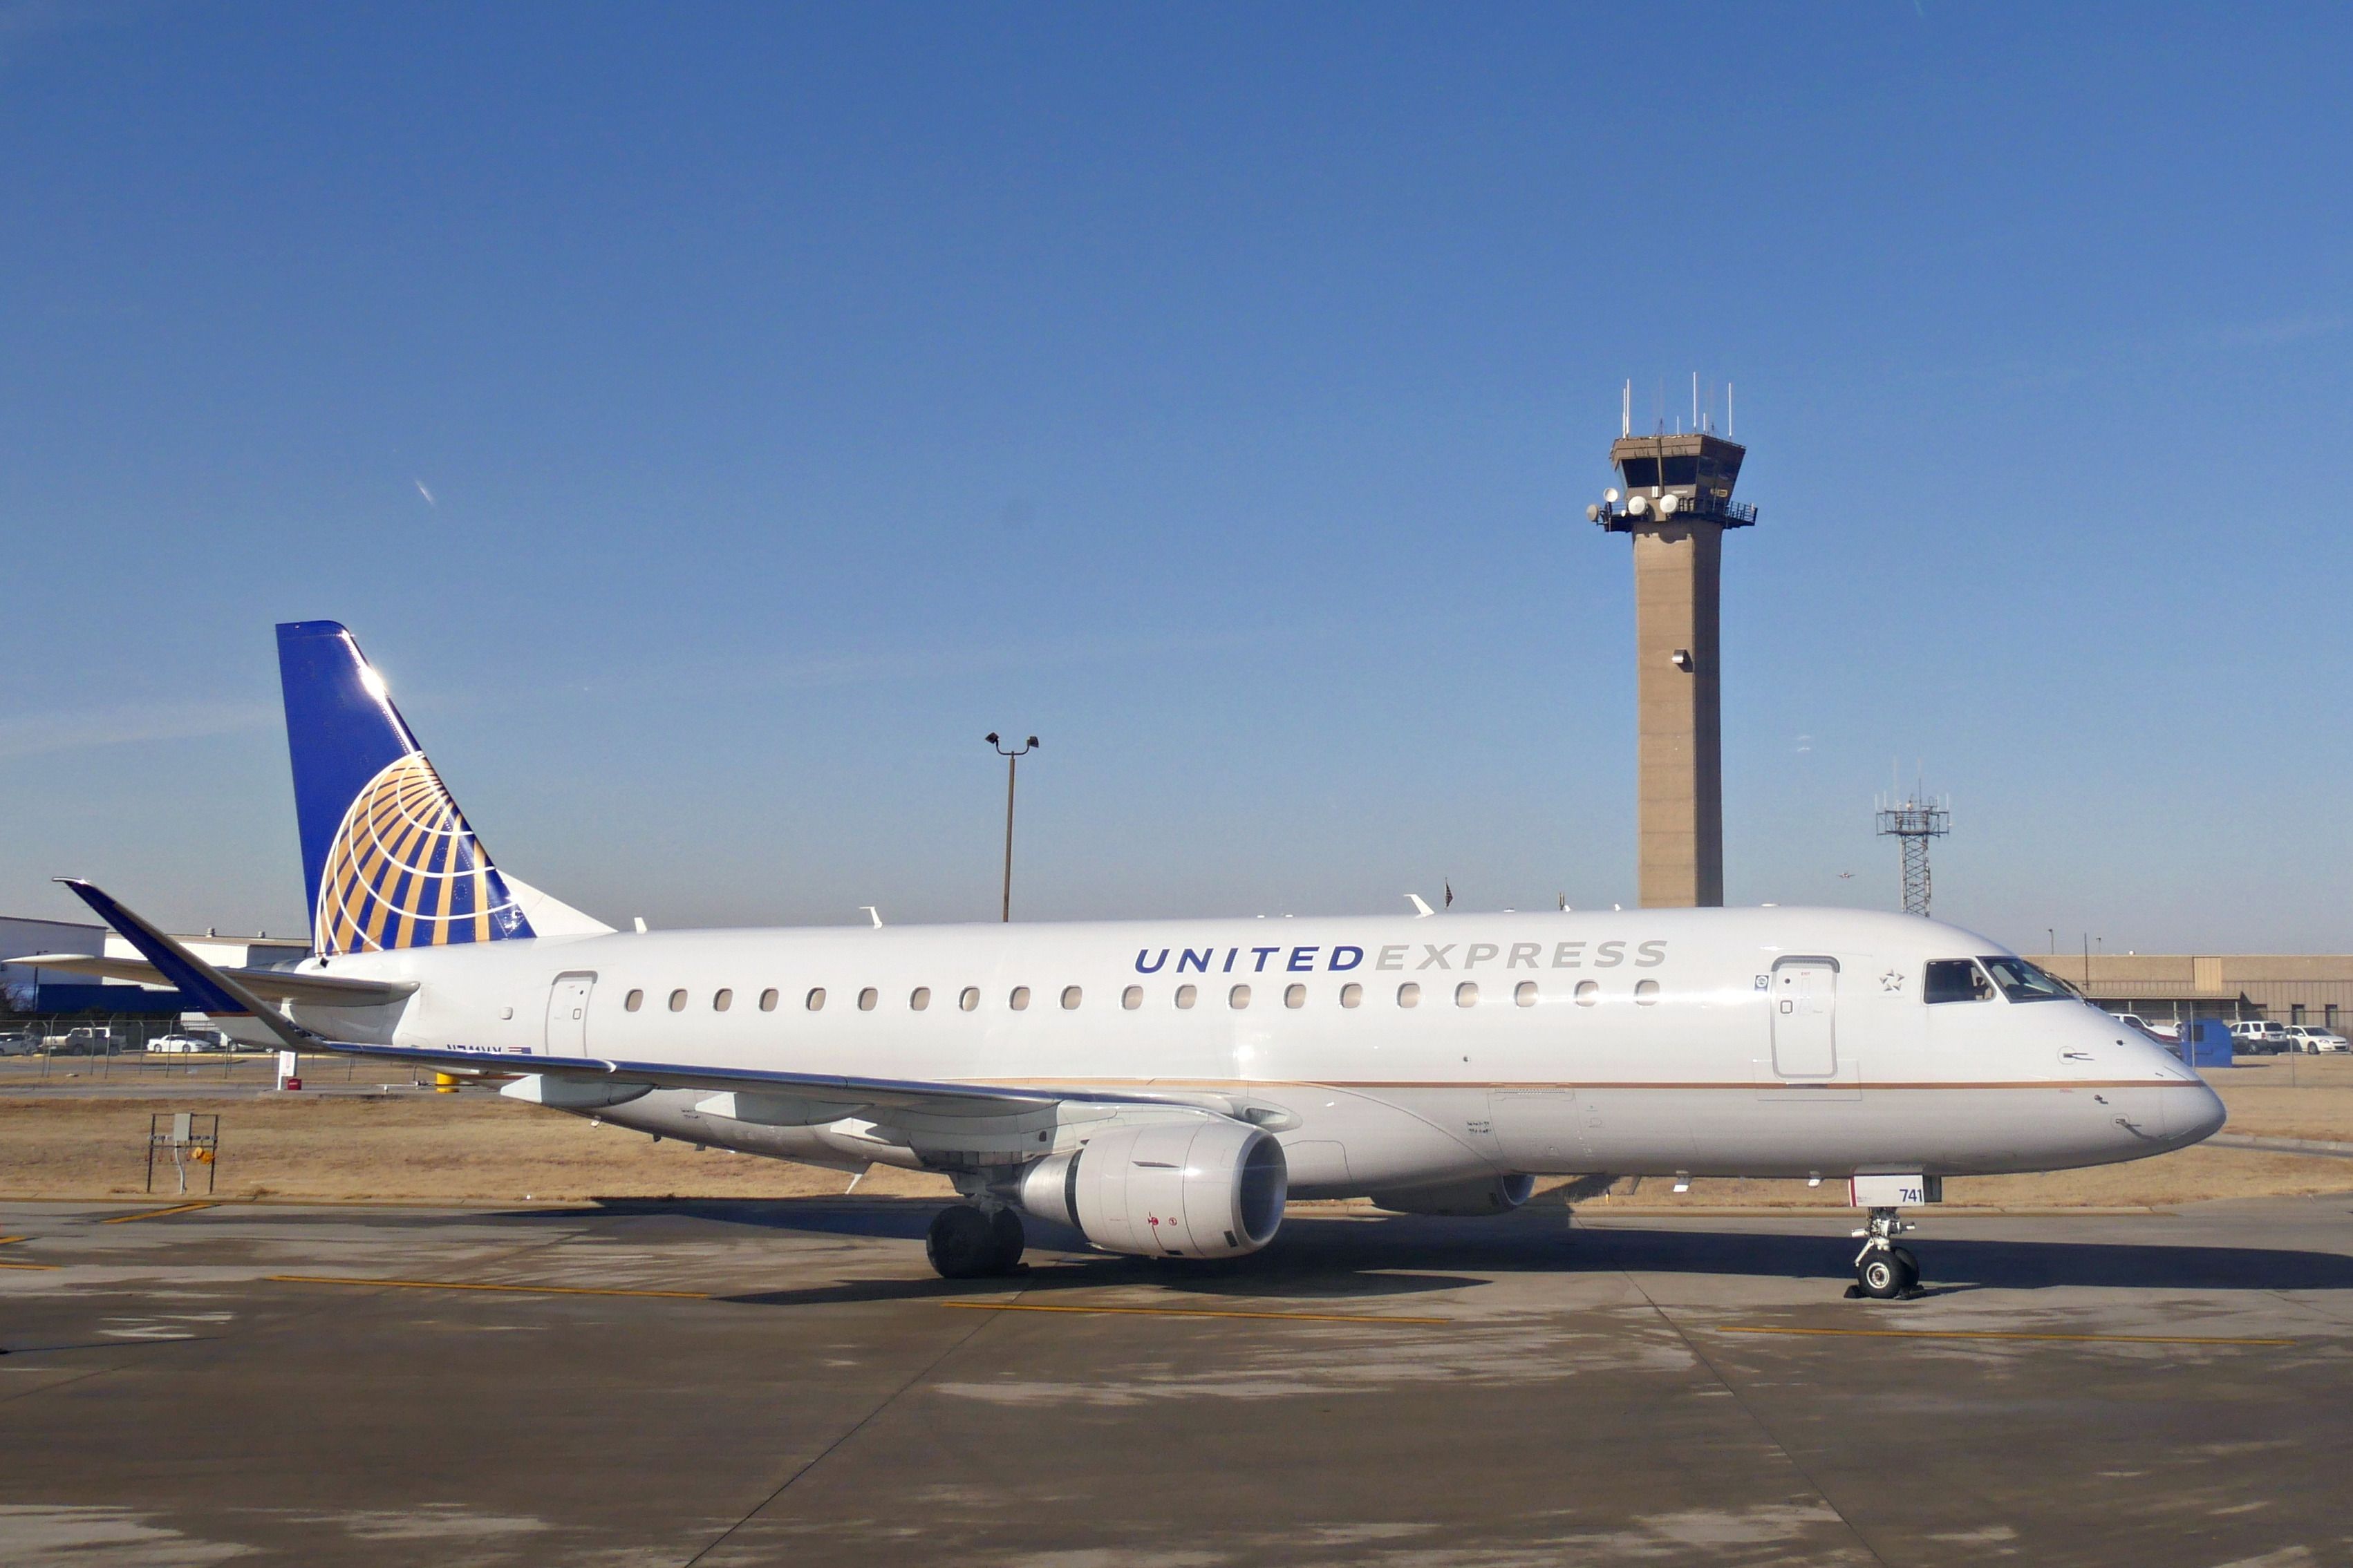 A United Airlines aircraft at the runway of the Will Rogers World Airport in Oklahoma City OKC